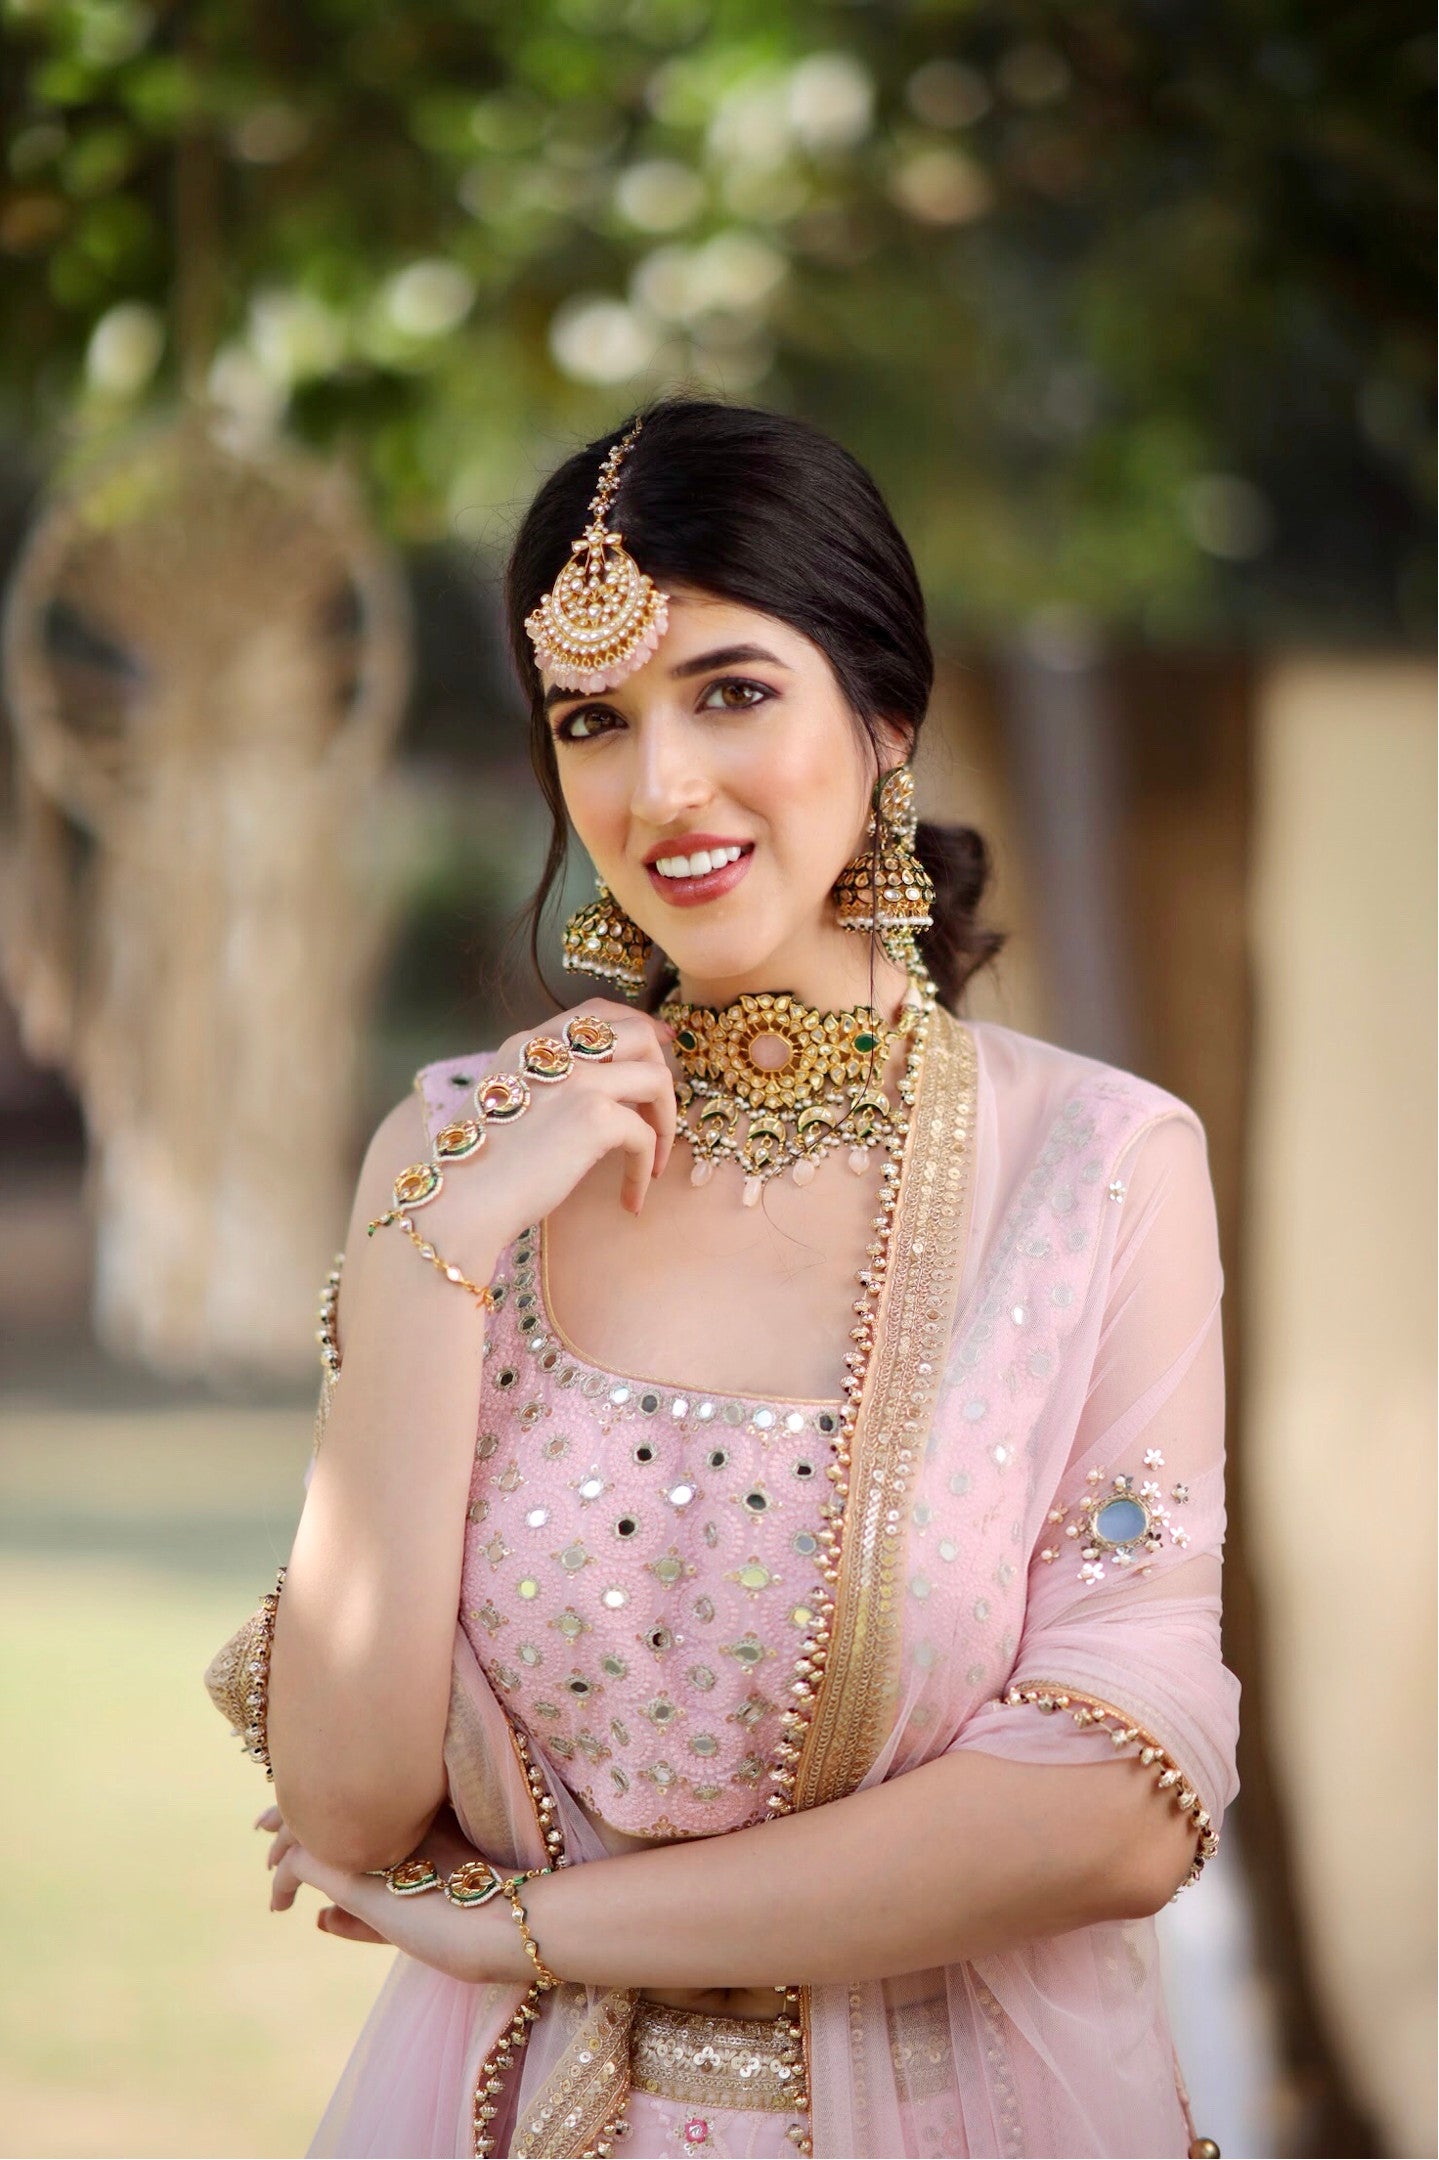 Photo of A bride in a pink lehenga with contrasting green jewellery |  Indian bridal outfits, Indian wedding guest dress, Pink lehenga